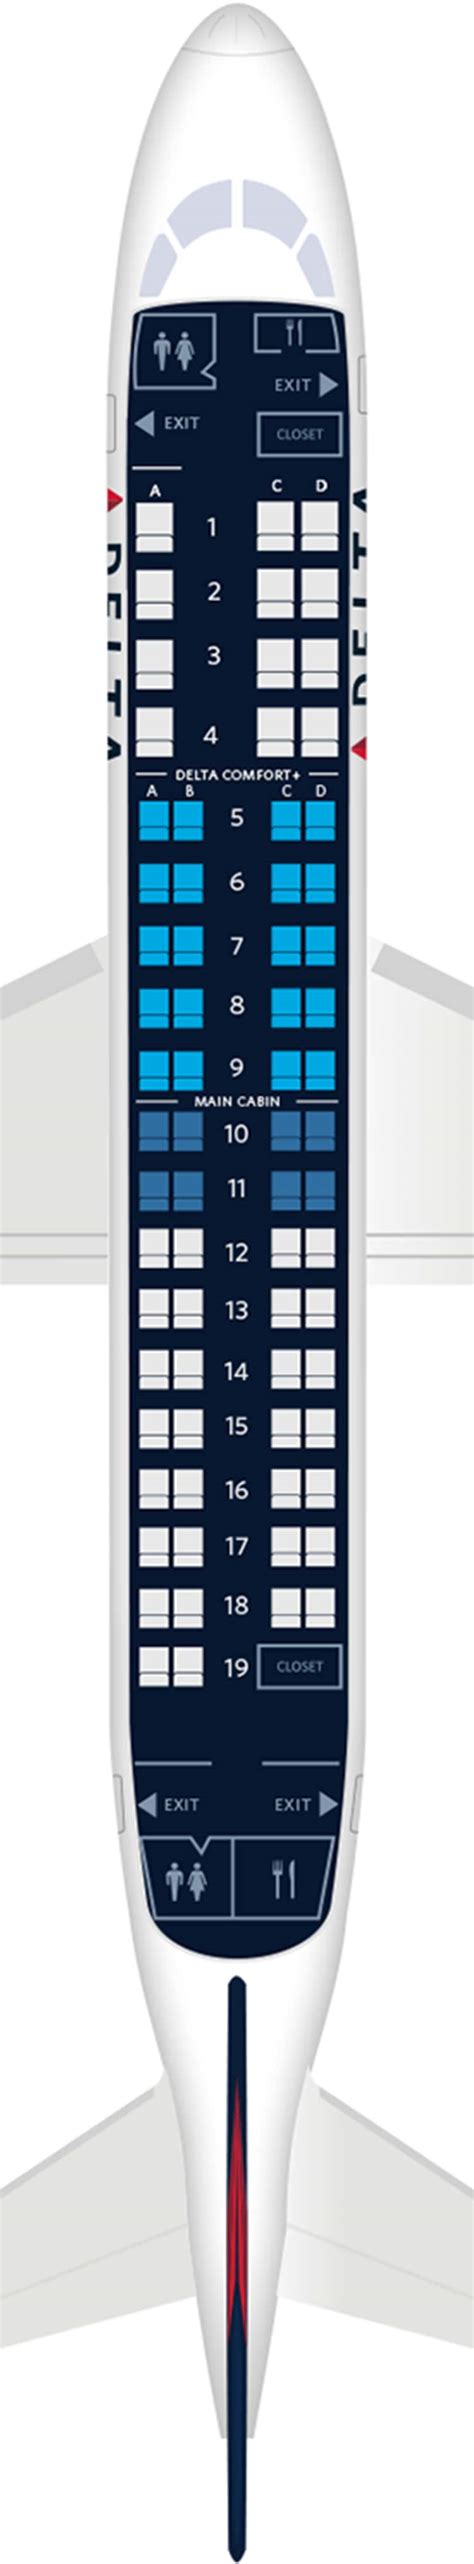 Embraer 175 seating map. Things To Know About Embraer 175 seating map. 